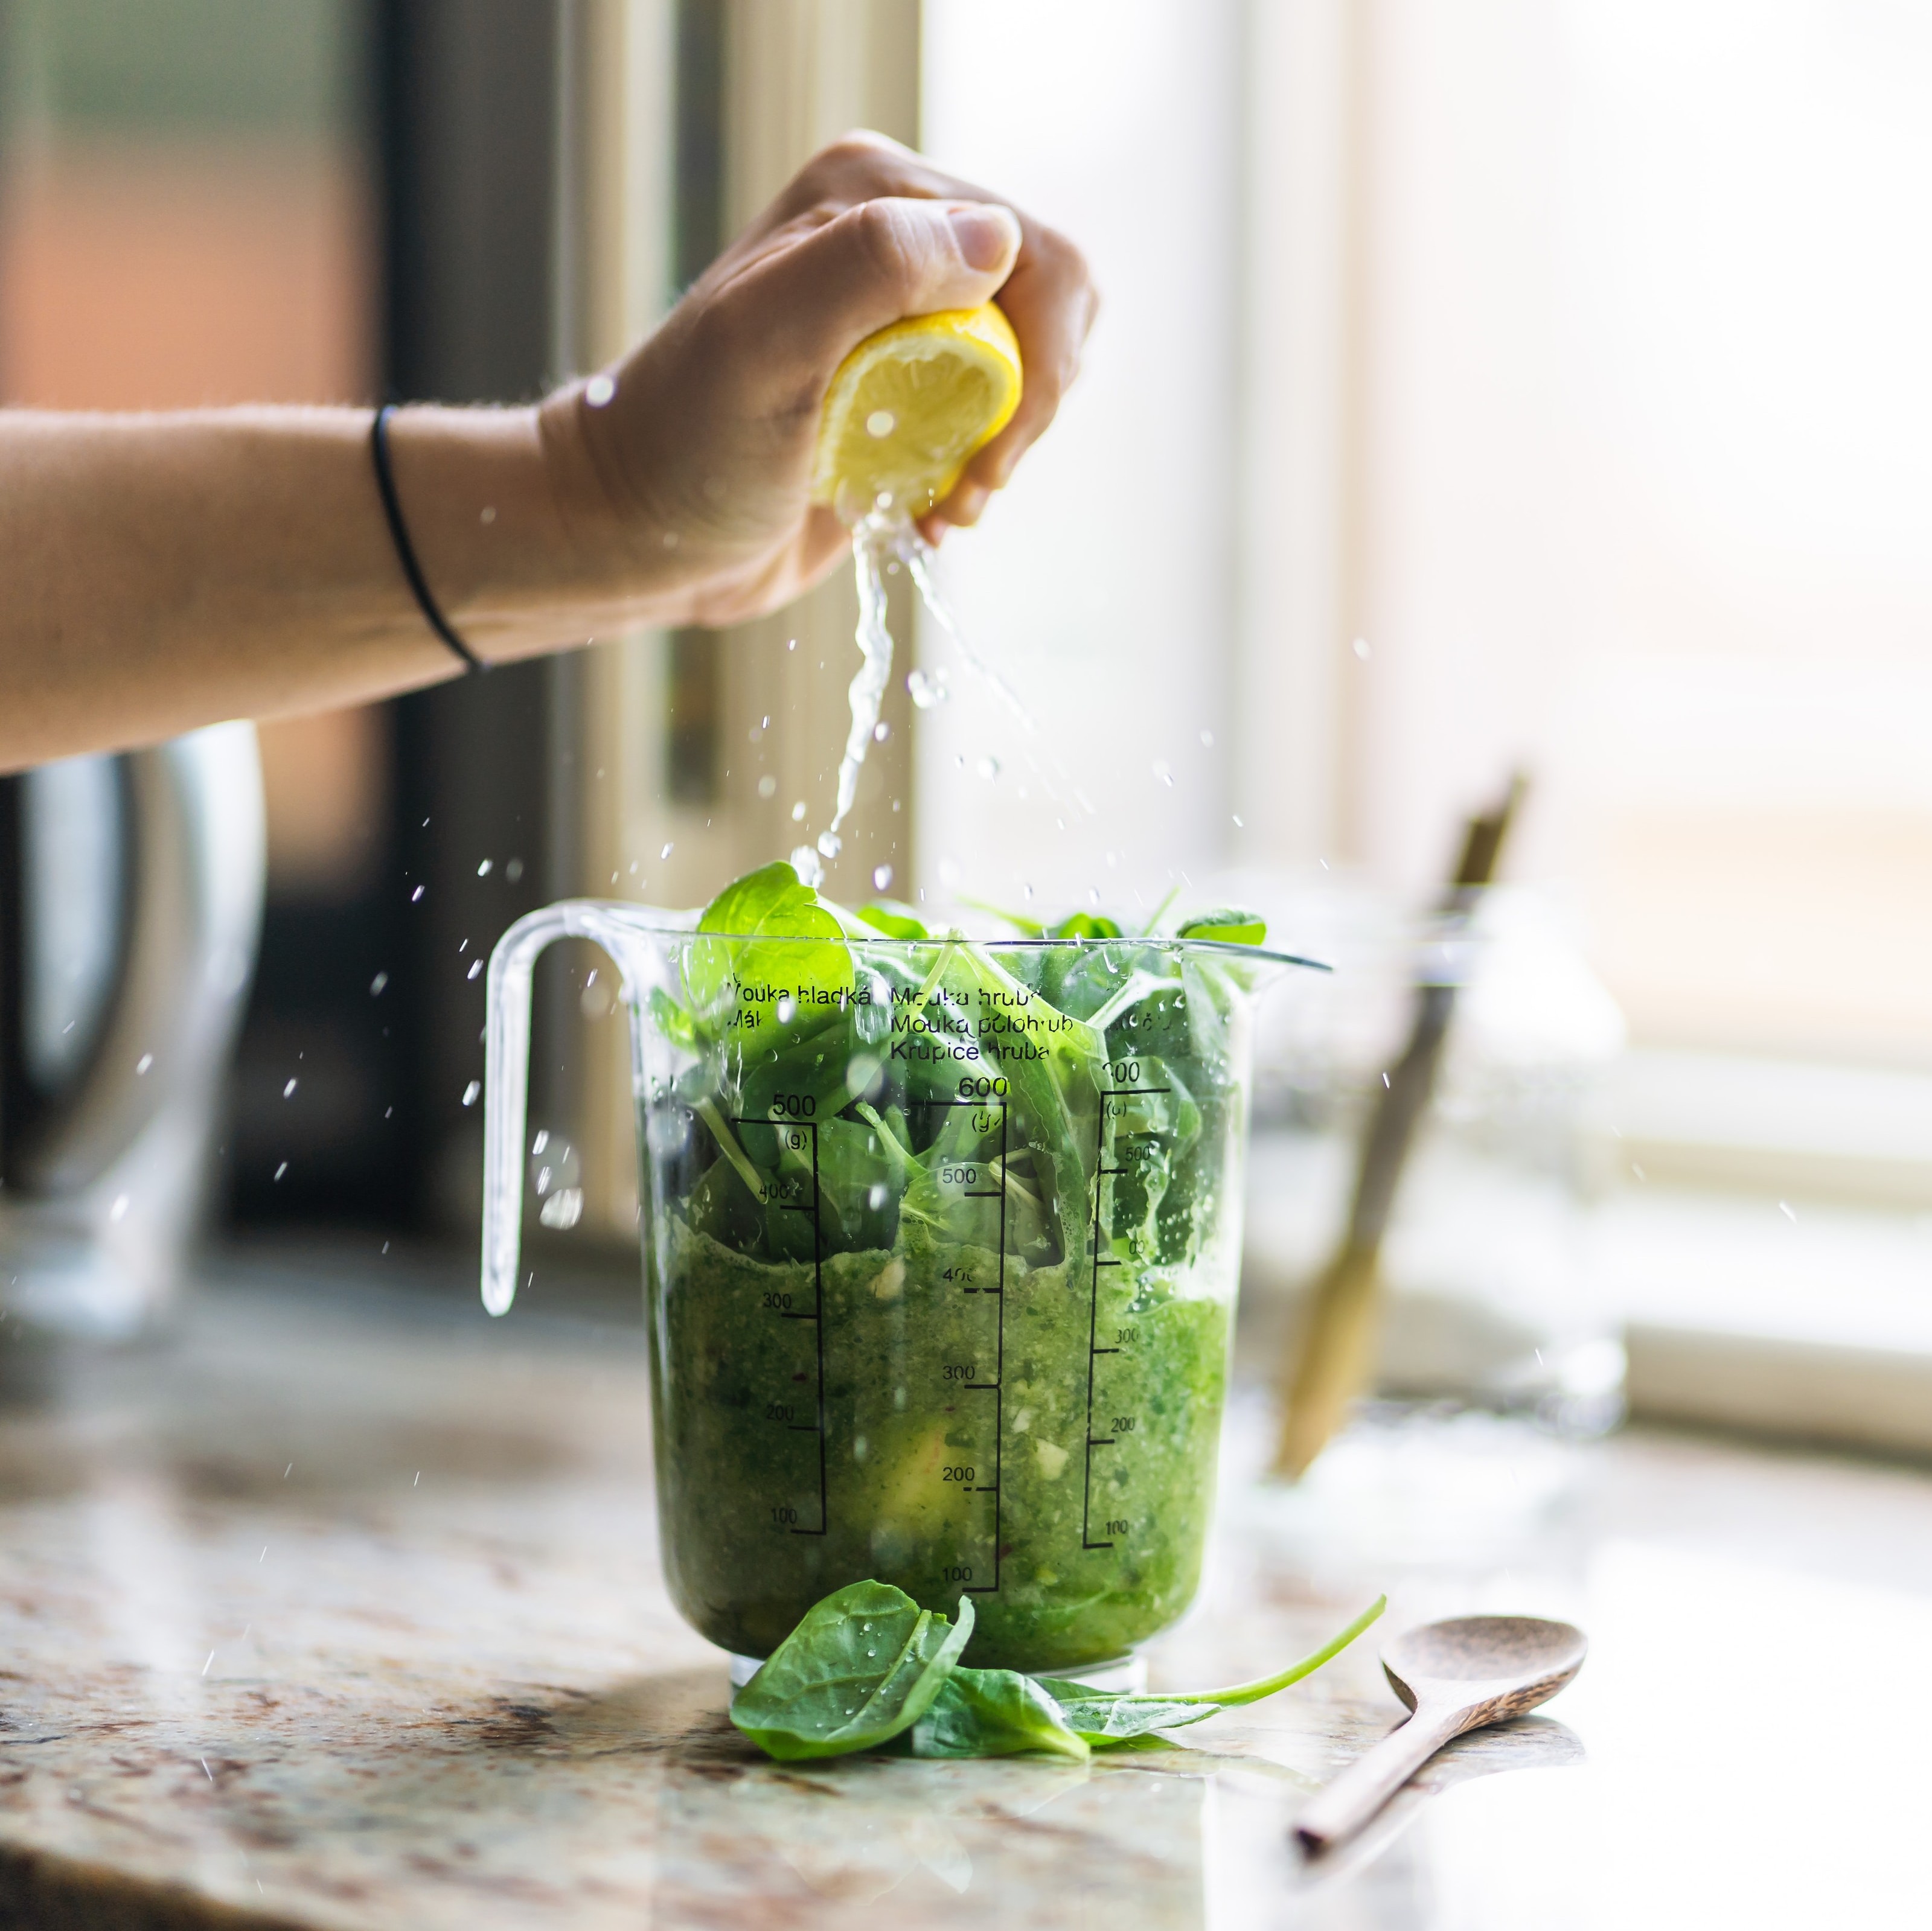 A hand squeezing half a lemon over a measuring cup full of leafy greens set on a counter with a wooden spoon beside it.